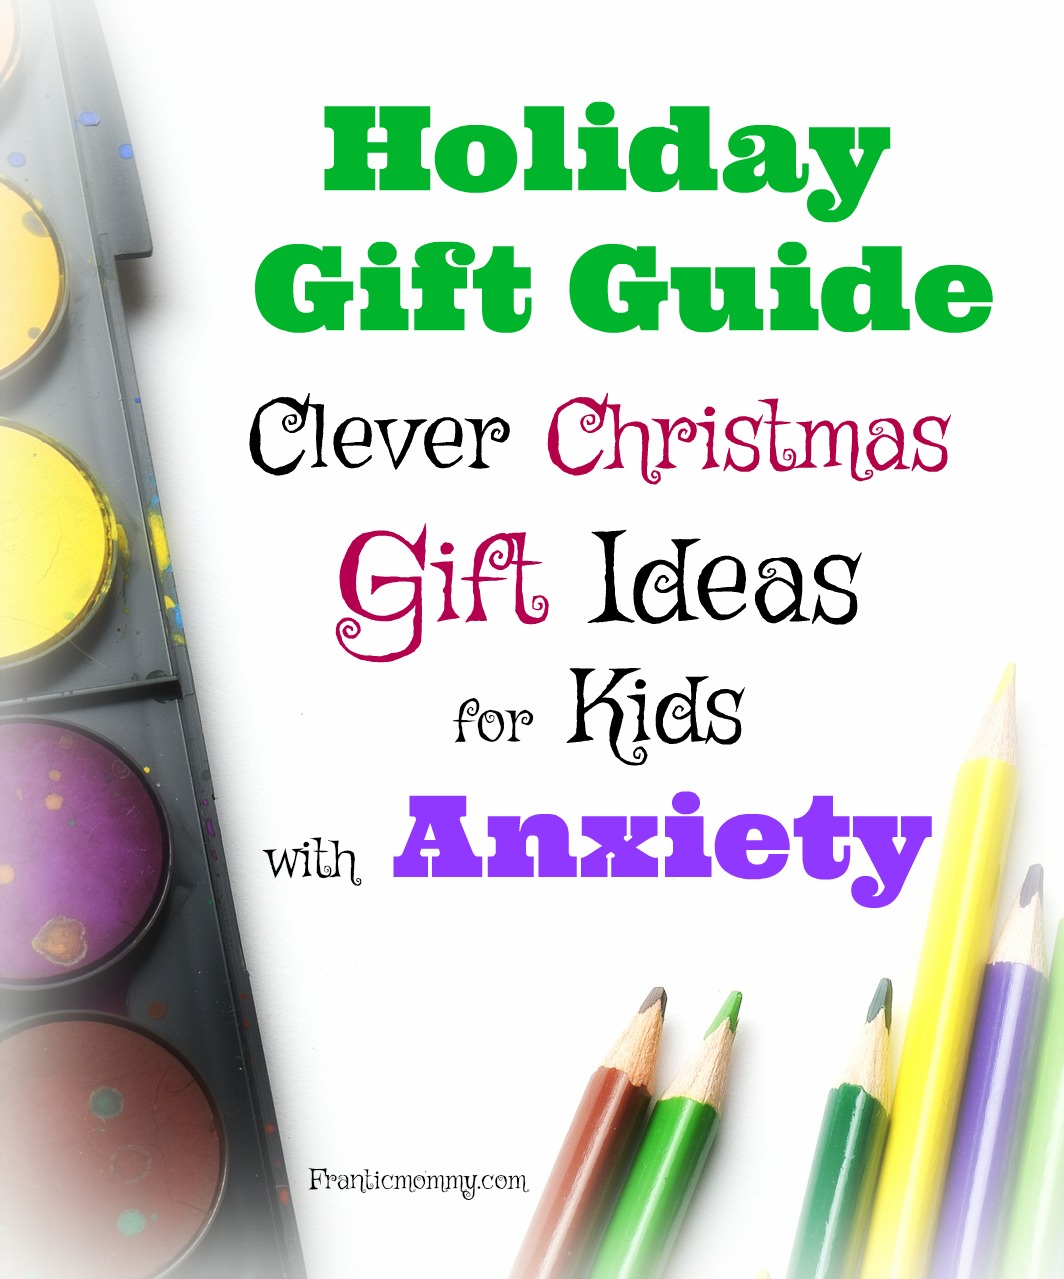 Holiday Gift Guide: Clever Christmas Gifts for Kids with Anxiety